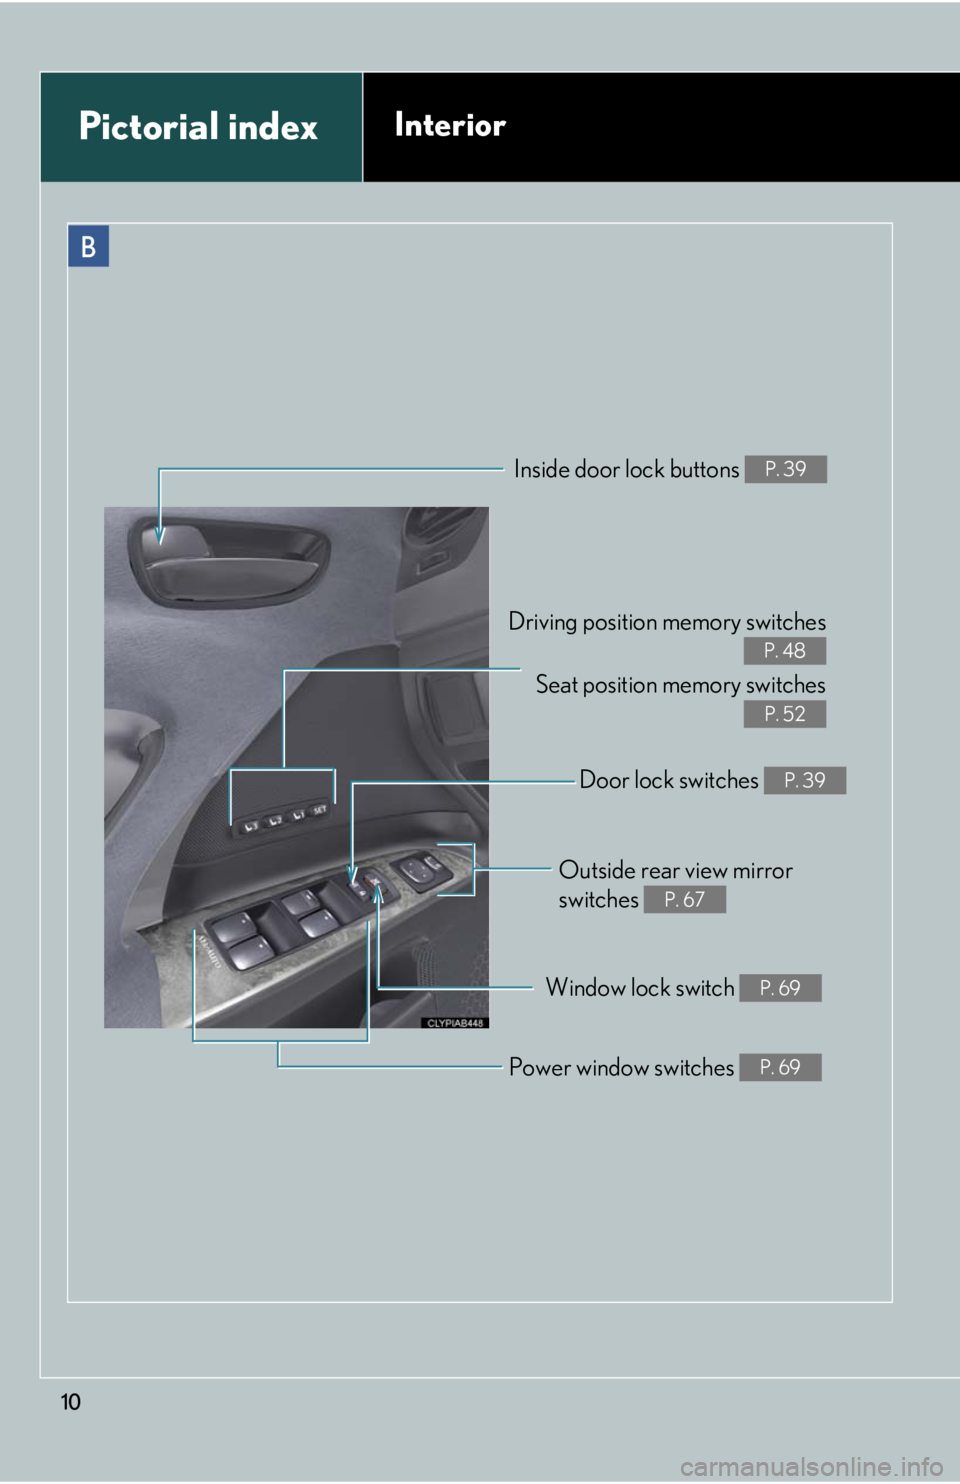 Lexus IS F 2010  Audio/video System / LEXUS 2010 IS F OWNERS MANUAL (OM53A21U) 10
B
Driving position memory switches
Seat position memory switches
P. 48
P. 52
Inside door lock buttons P. 39
Outside rear view mirror 
switches 
P. 67
Window lock switch P. 69
Power window switches 